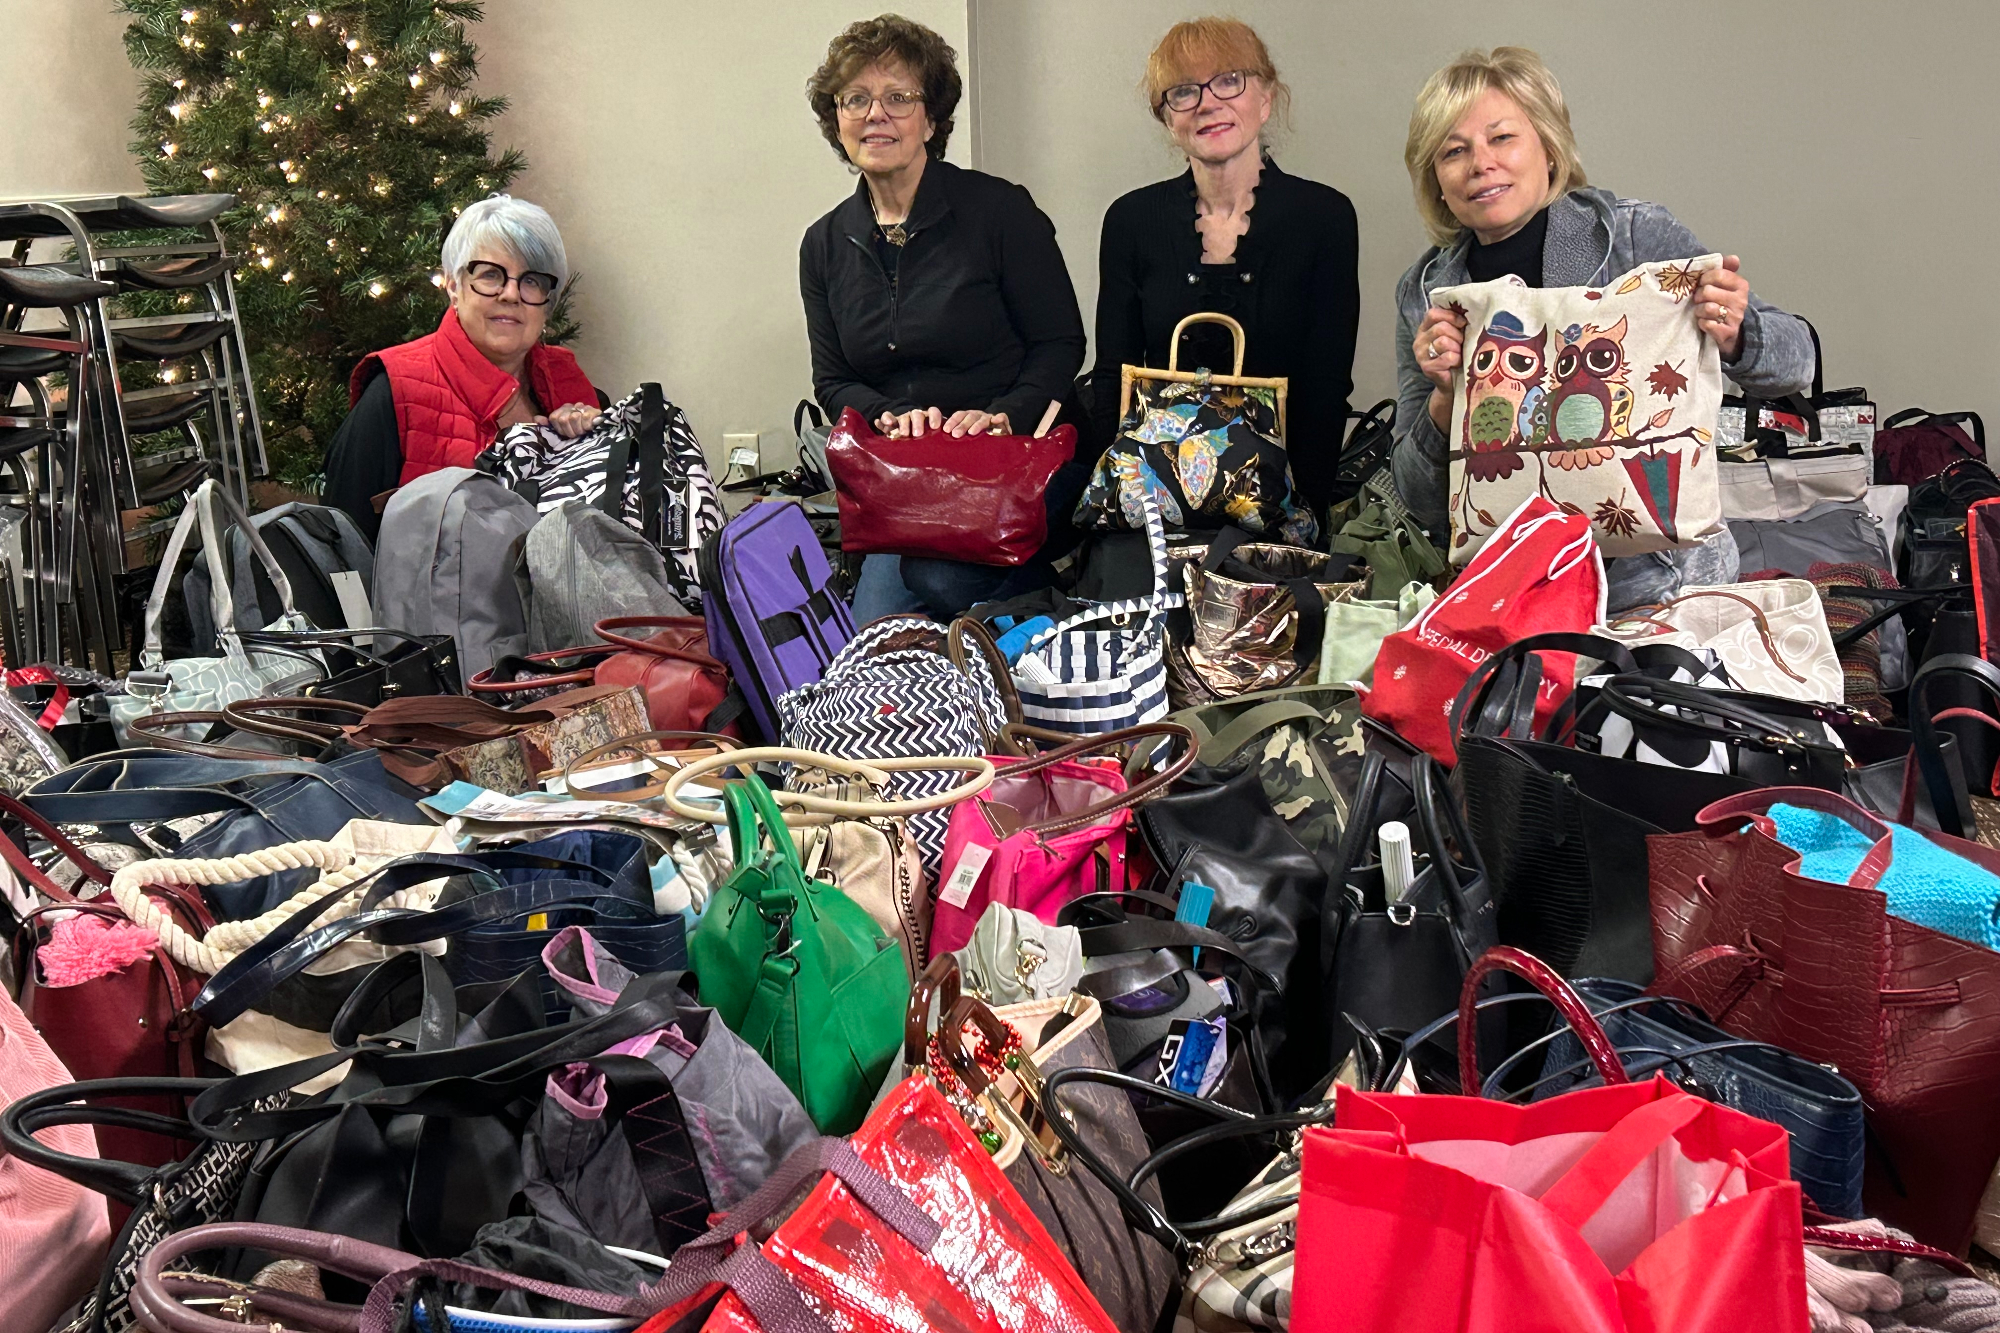 Local Fill a Purse for Sister campaign now accepting donations